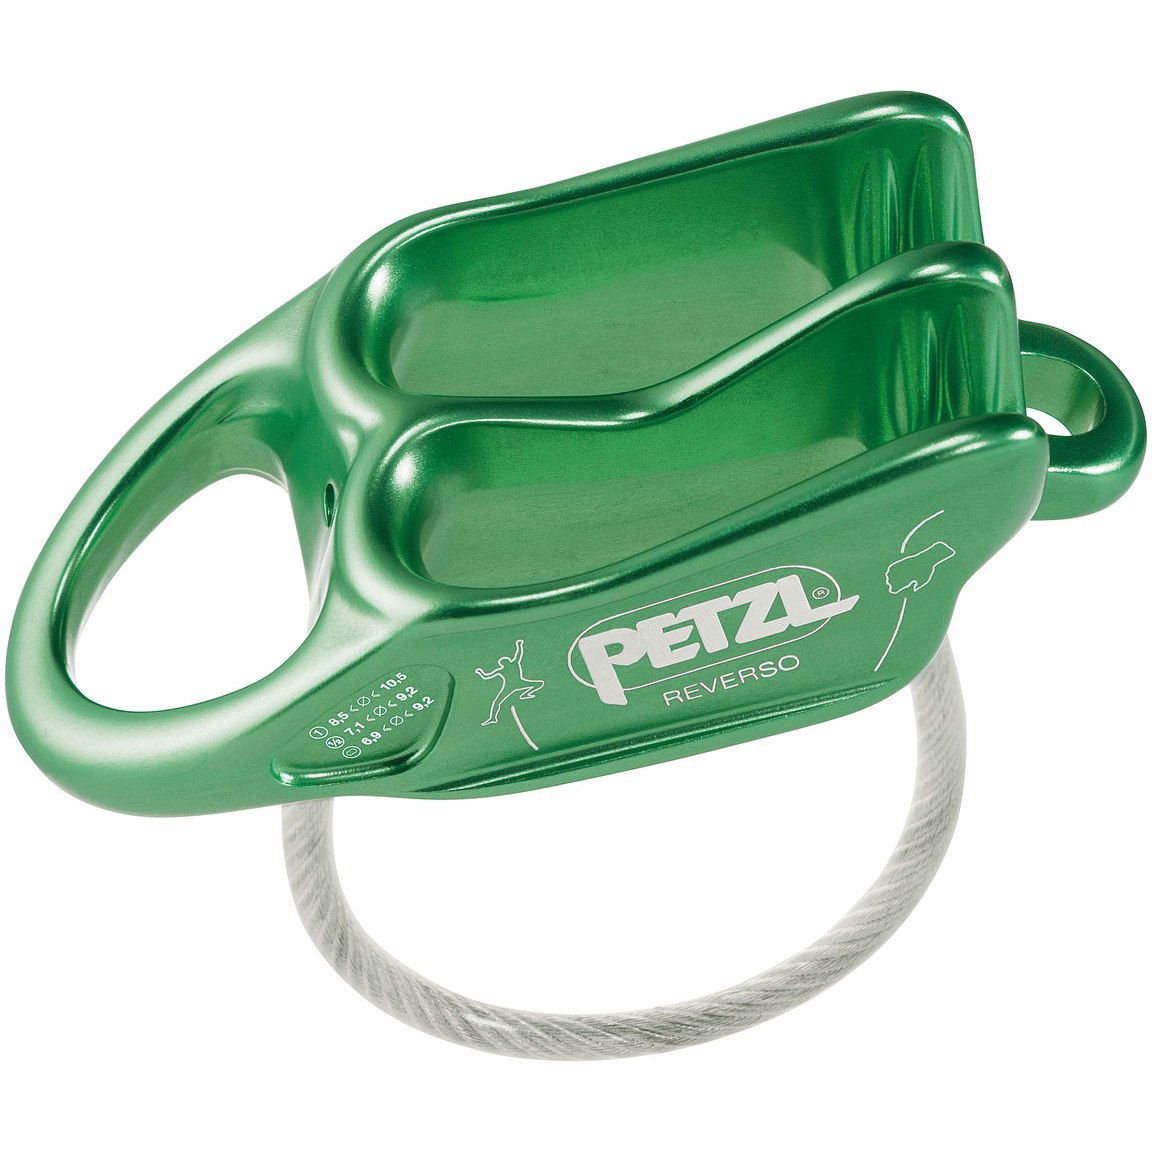 Picture of Petzl Reverso Belay/Rappel Device - green